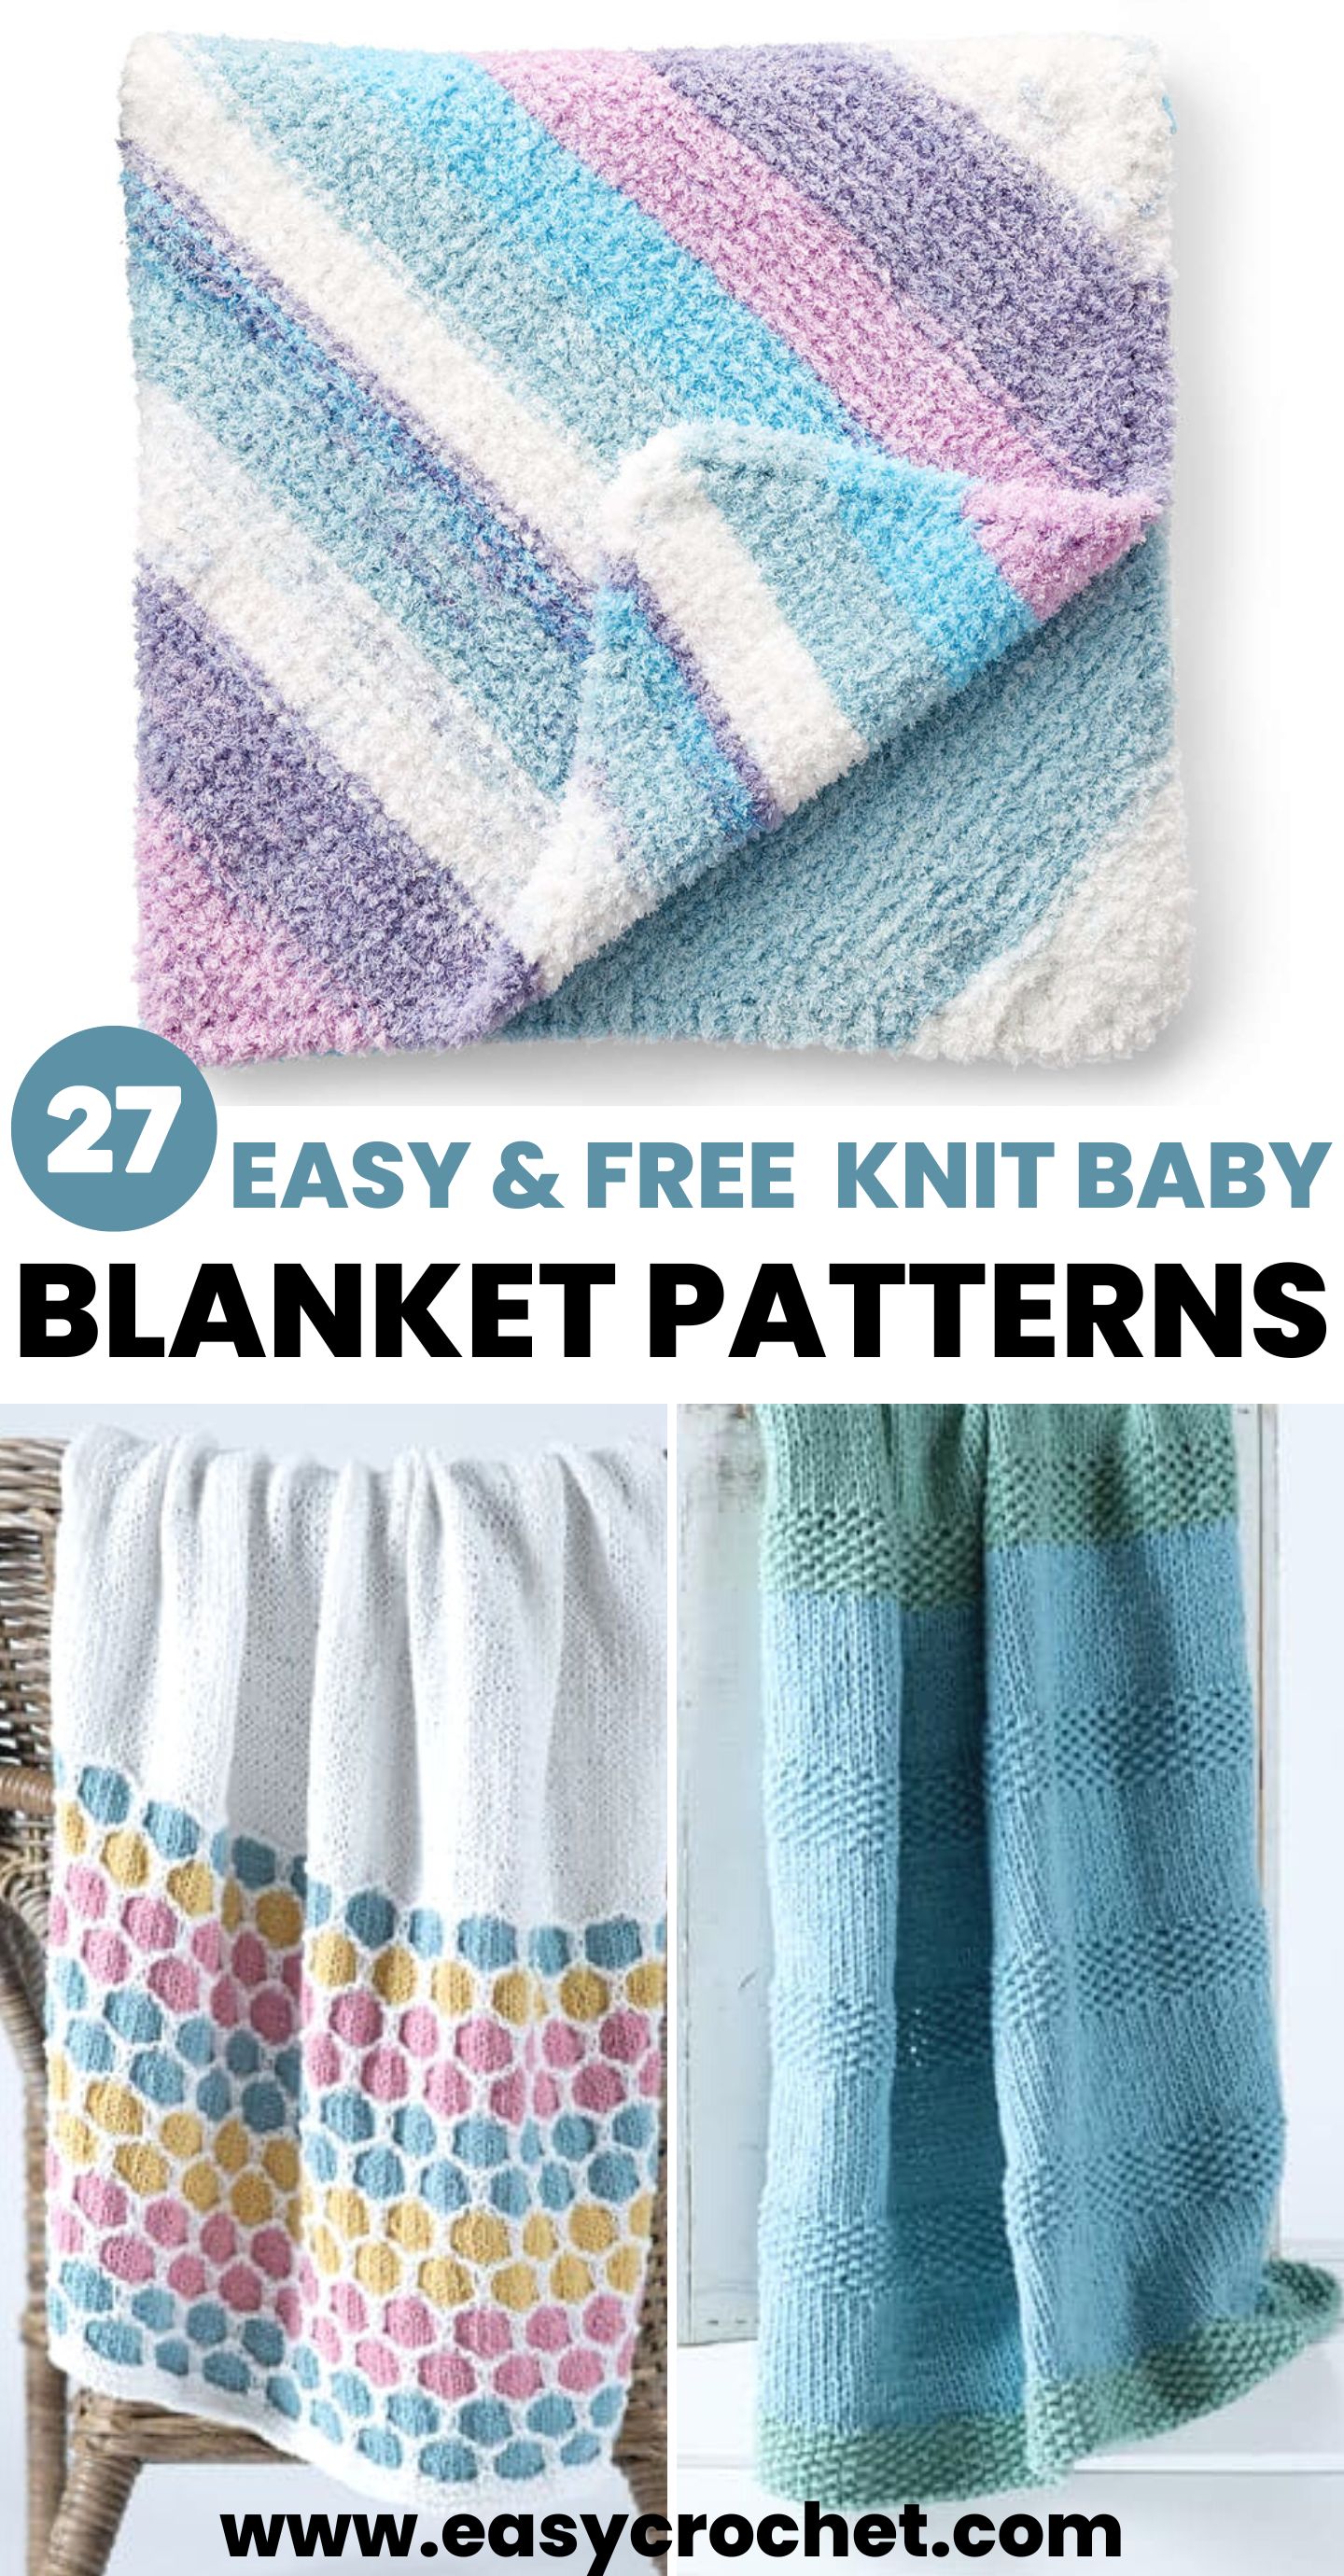 Knit and purl patterns - Gathered